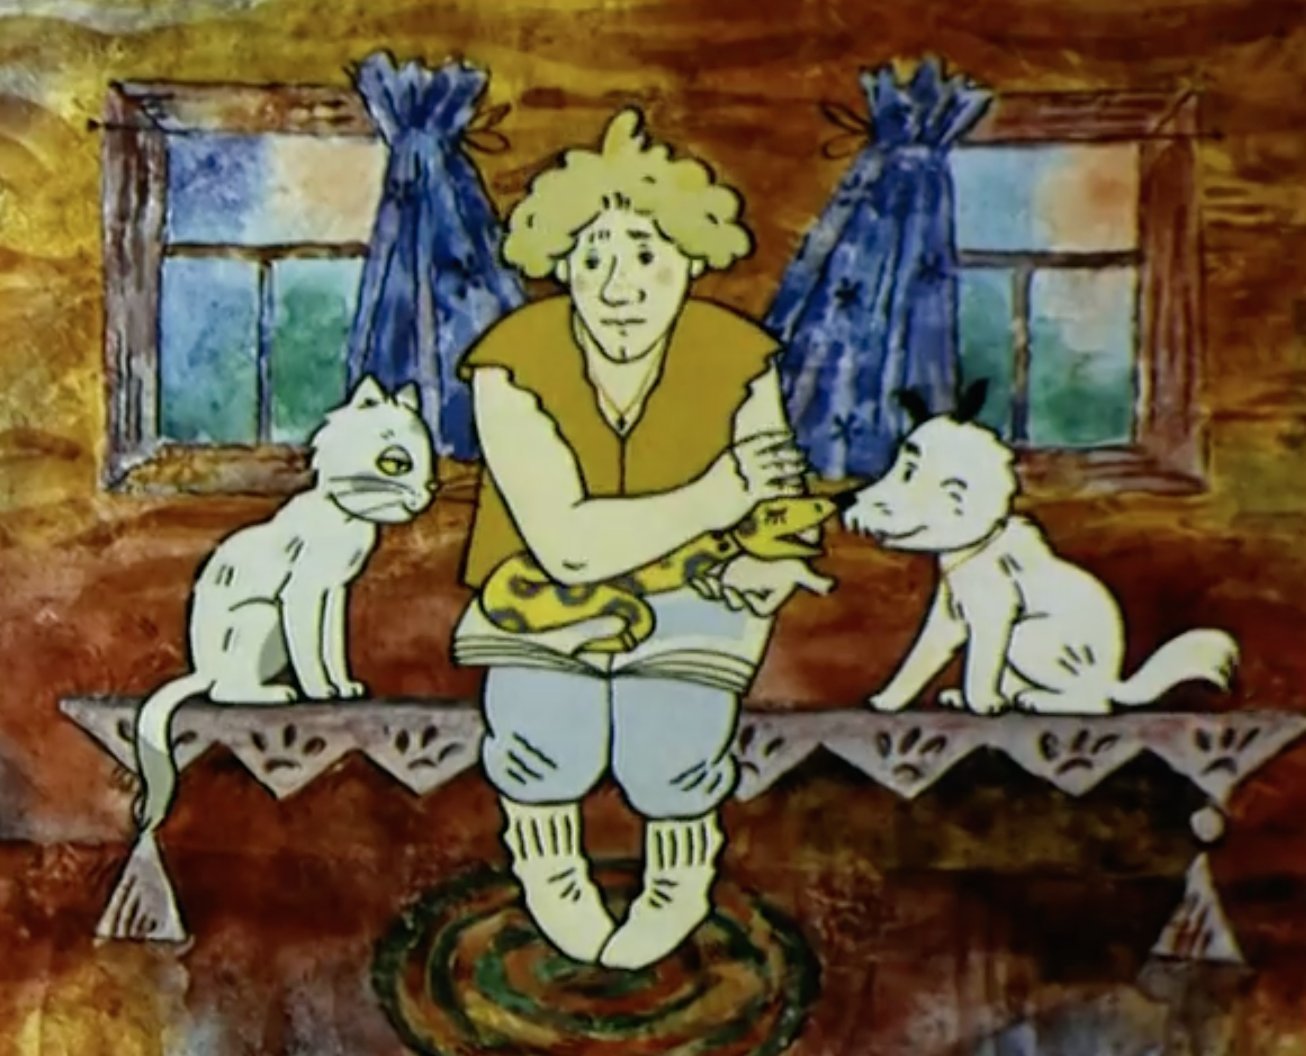 A cartoon of a person sitting on a table with cats Description automatically generated